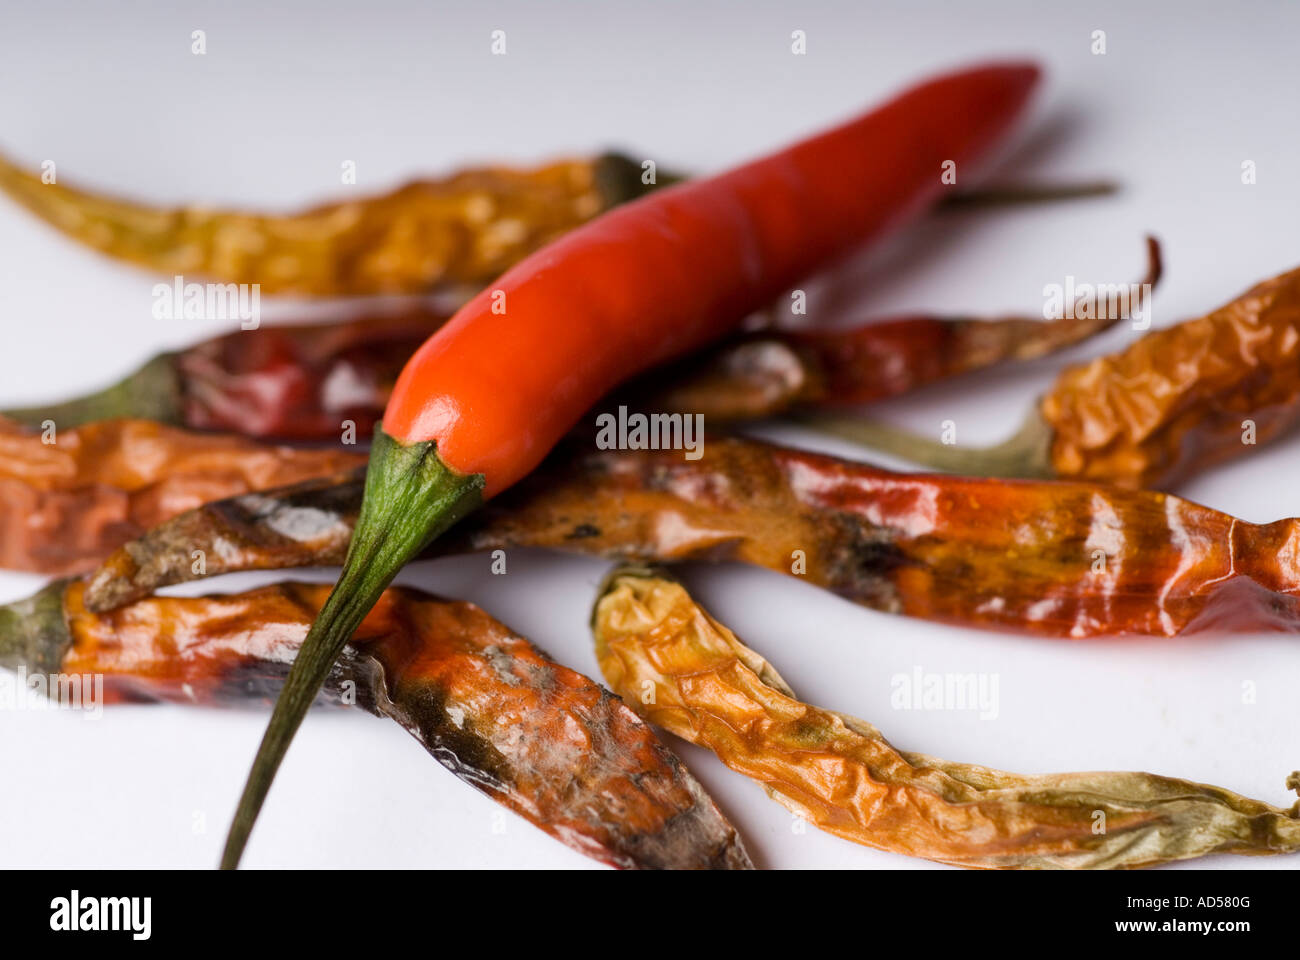 Image of a fresh red chilli pepper with a bunch of old dried chilli peppers Stock Photo